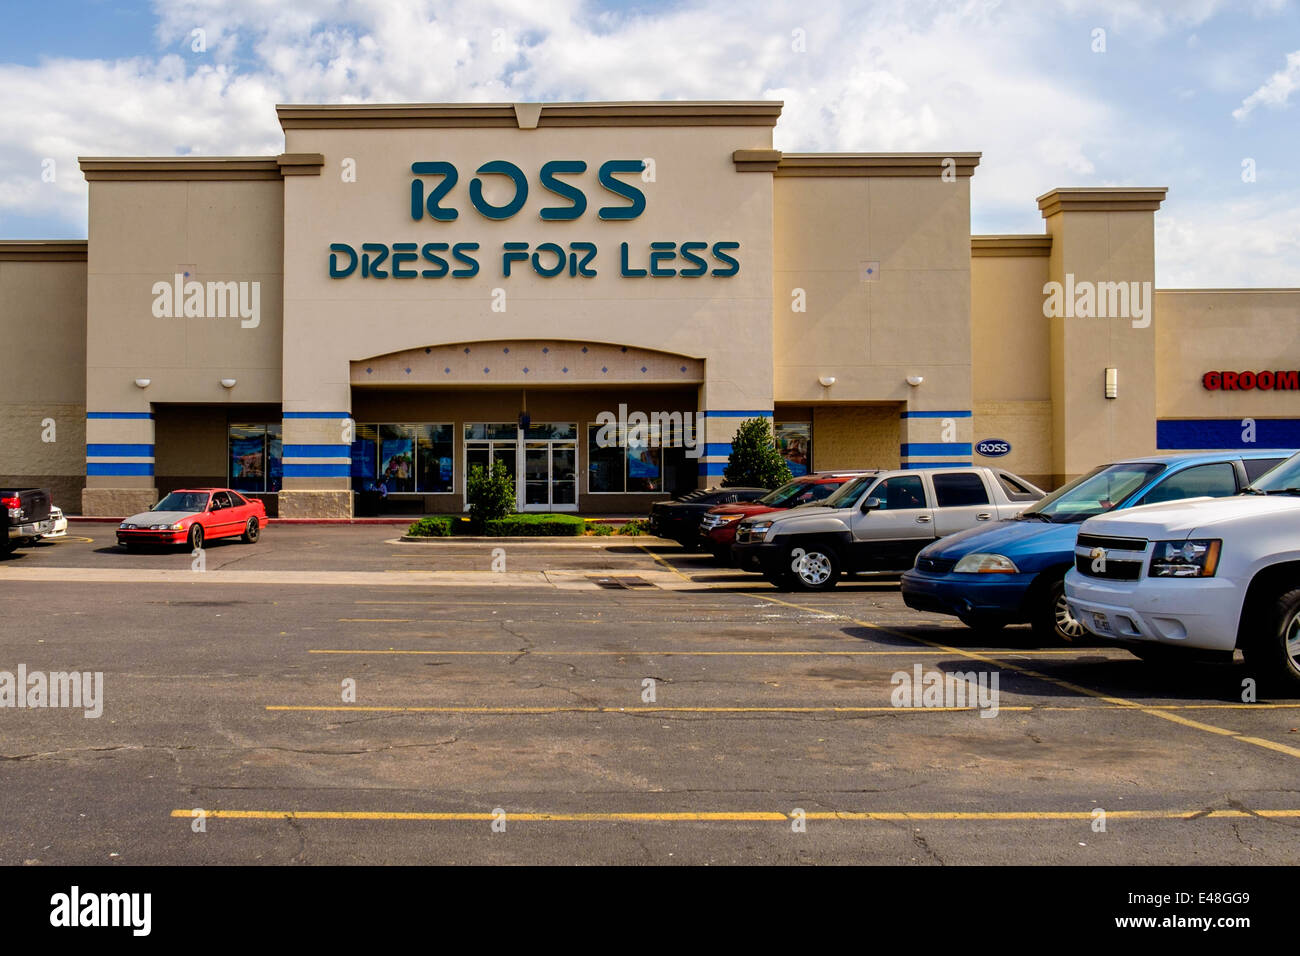 The exterior storefront, logo and parking lot of Ross Dress For Less, a discount clothing outlet. Oklahoma City, Oklahoma, USA. Stock Photo